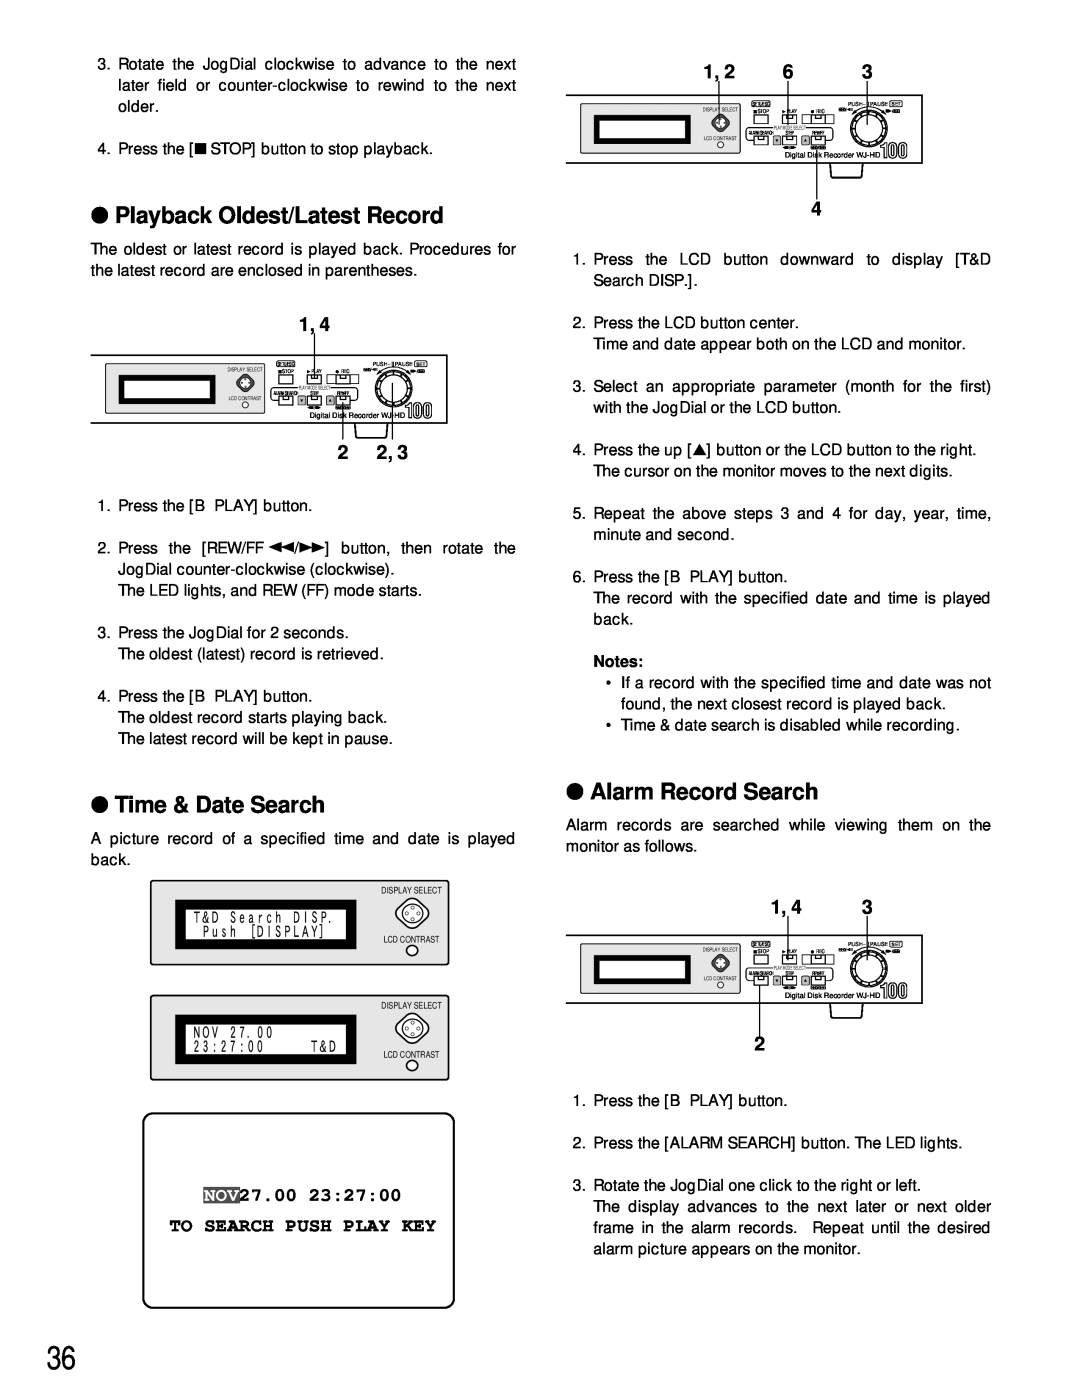 Panasonic WJ-HD100 operating instructions Playback Oldest/Latest Record, Time & Date Search, Alarm Record Search 